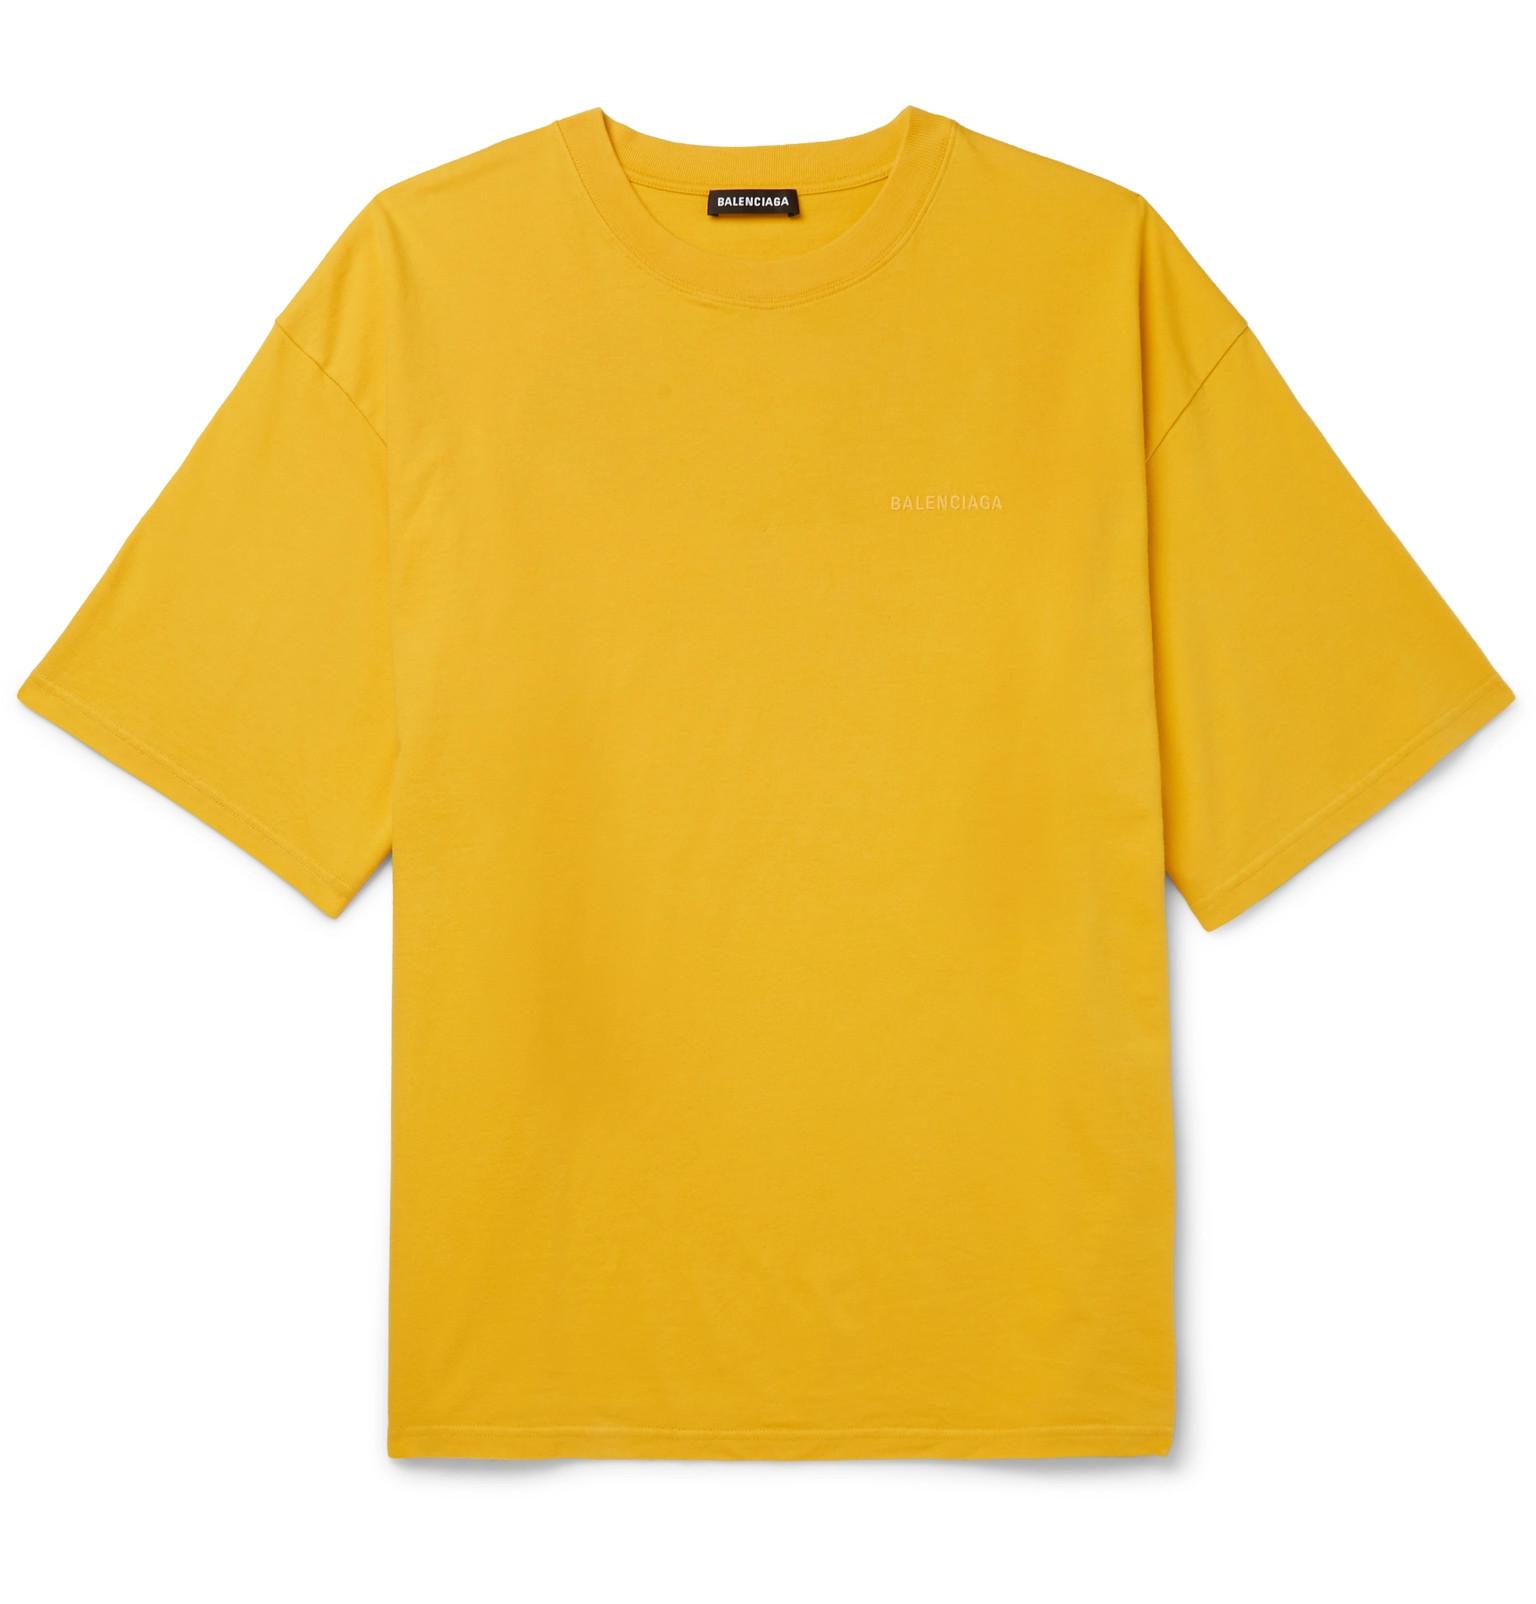 Balenciaga Oversized Printed Cotton-jersey T-shirt in Yellow for Men - Lyst